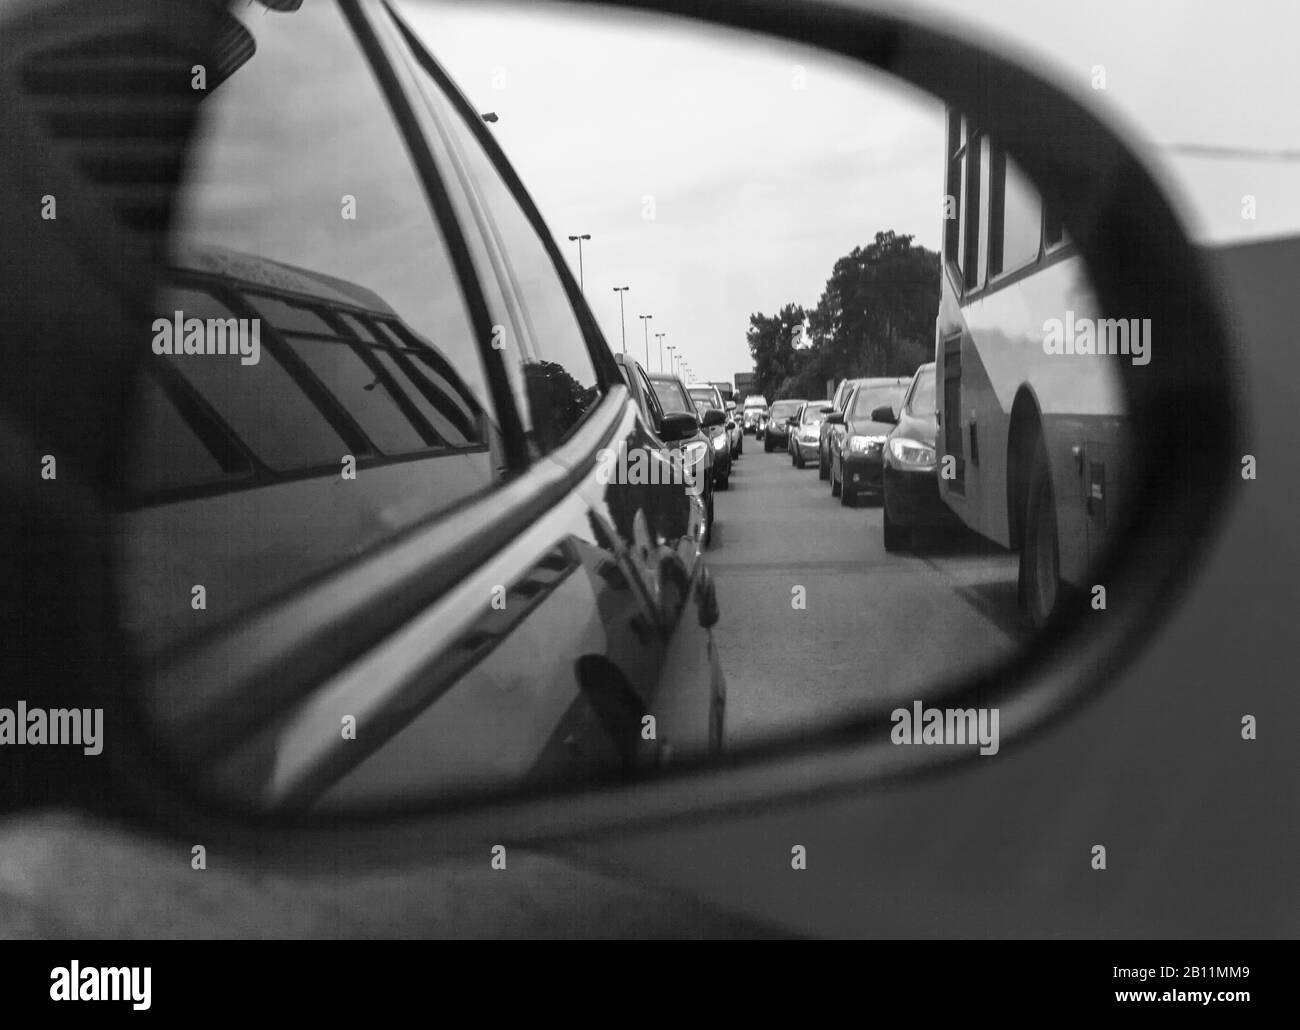 Reflection of a traffic jam in a sideview mirror. old black and white photography filter applied Stock Photo